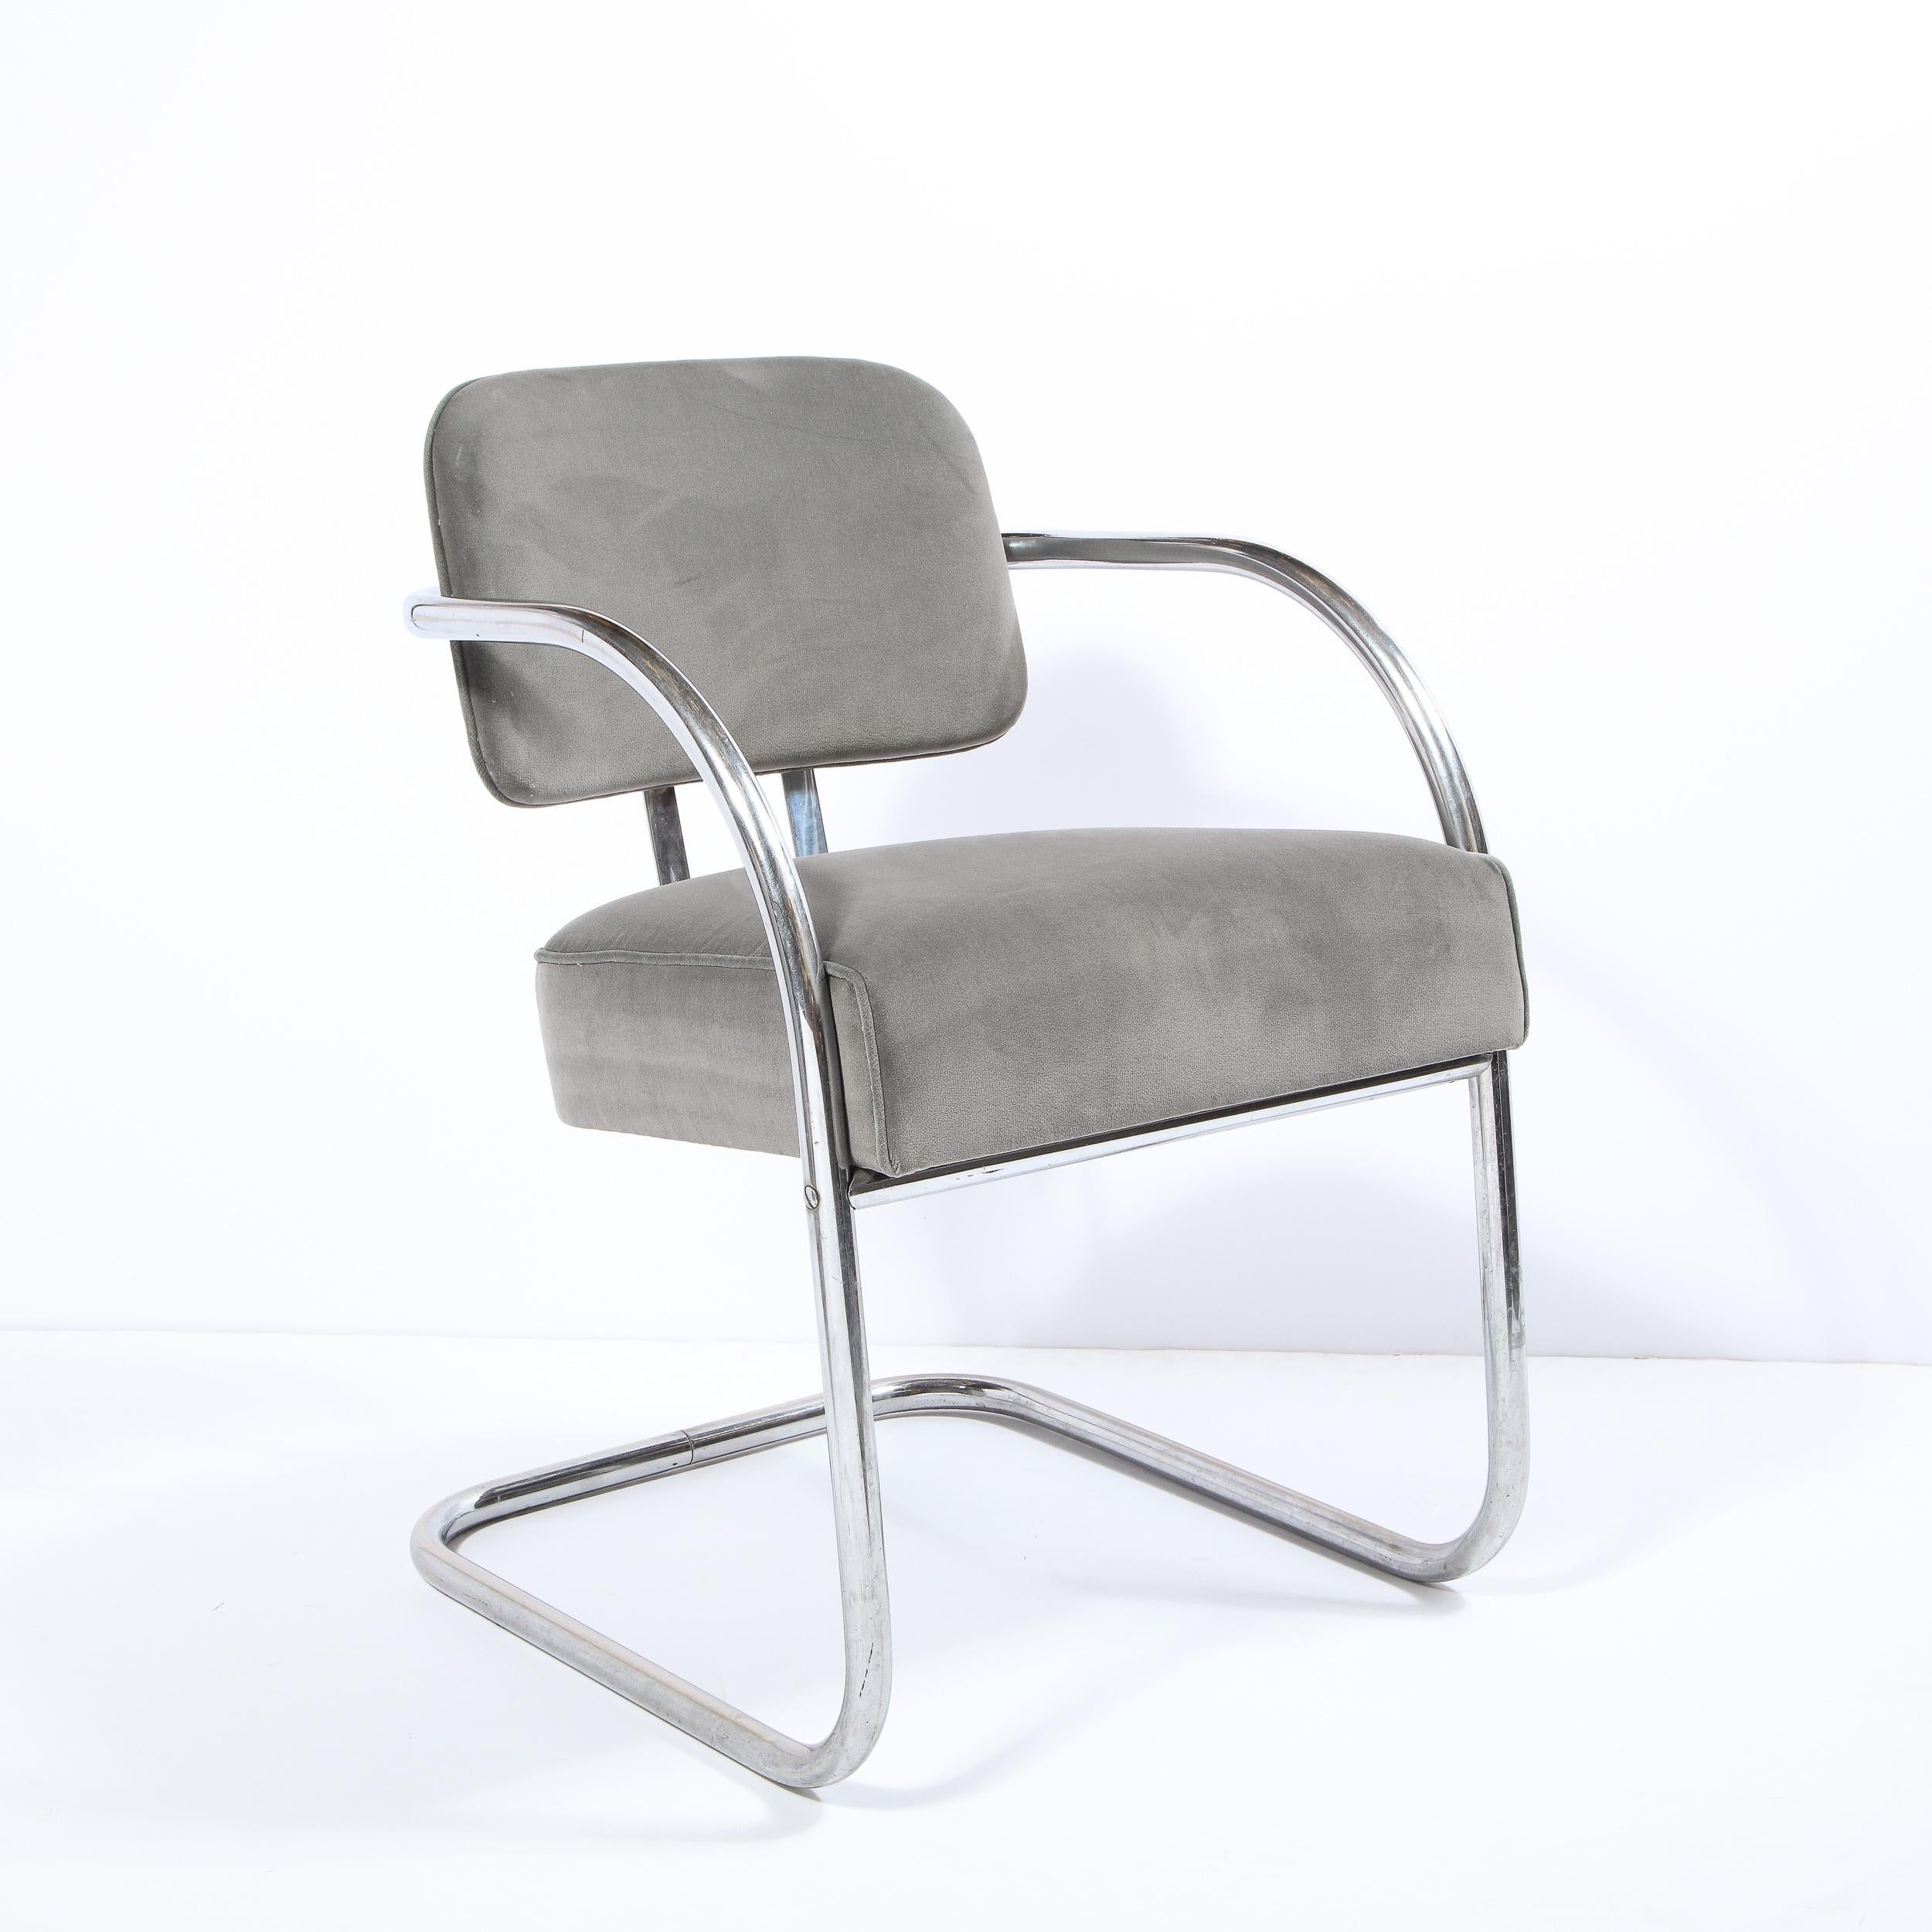 This sophisticated Art Deco Machine Age occasional/ side chair was realized in the United States, circa 1935. It features a subtly cantilevered tubular bent aluminum frame with a floating back seat, streamlined arms, and a gently rounded cushion